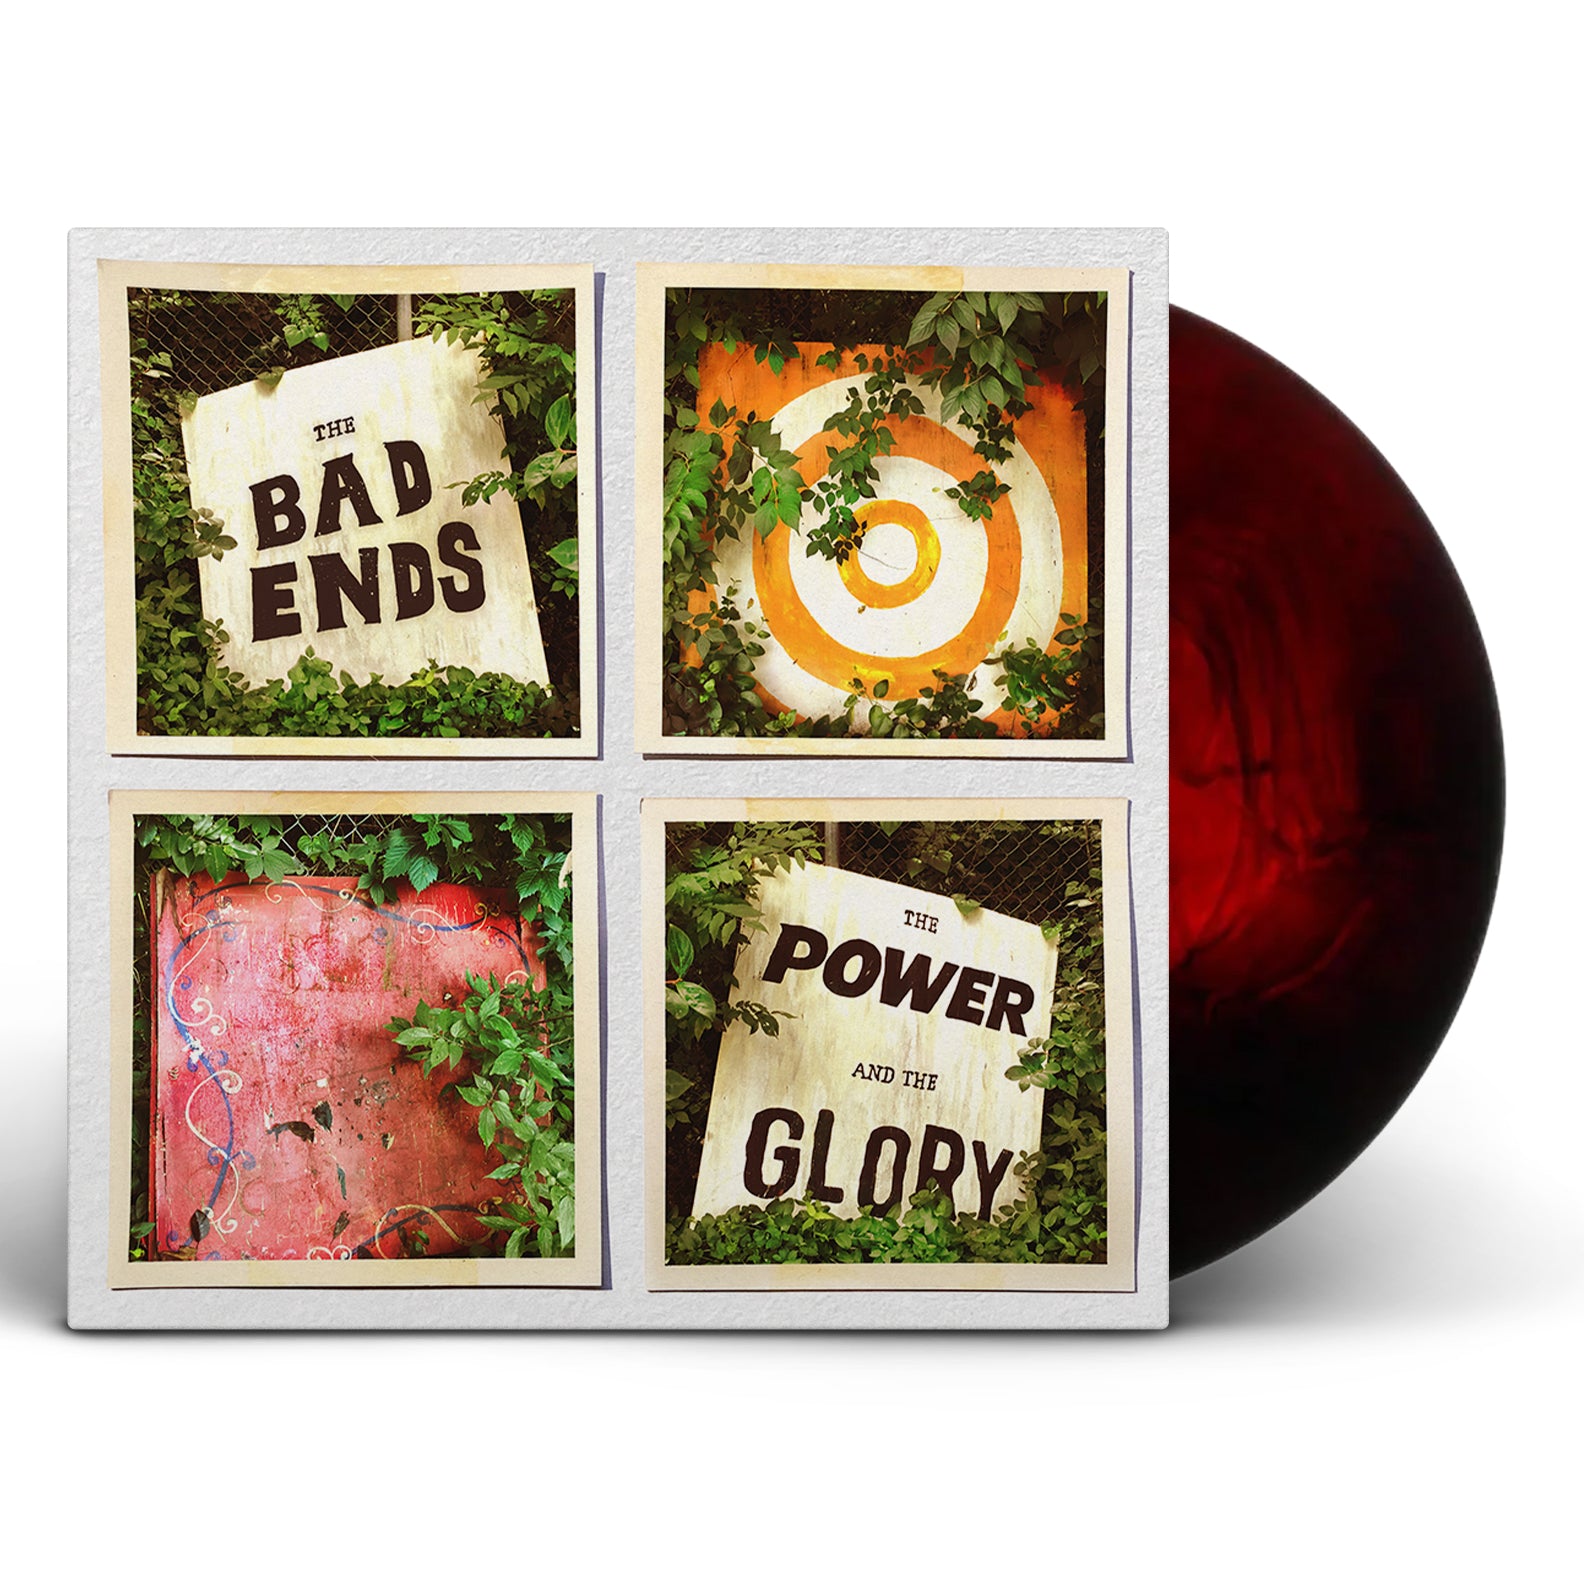 The Bad Ends - The Power And The Glory [Limited Edition Color Vinyl]